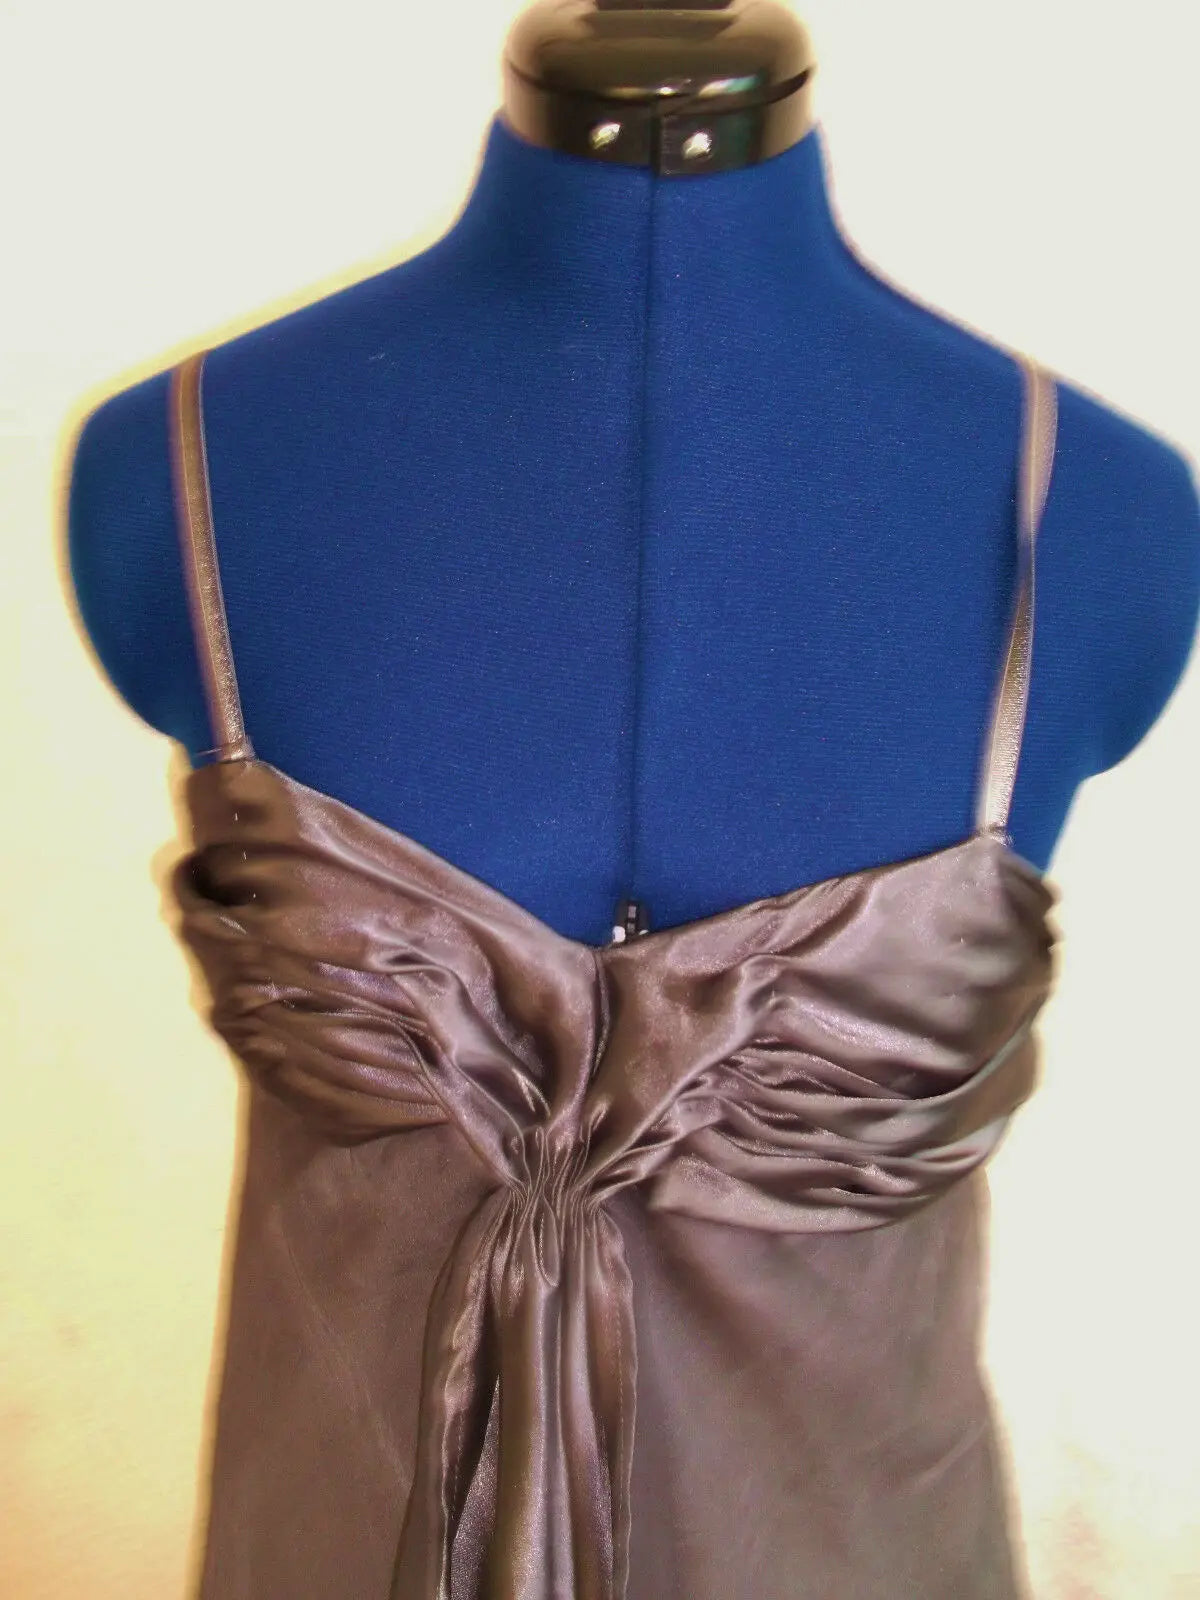 Miss Posh silver satin lined strappy party dress. ruffle front design Size 8/10 Miss Posh